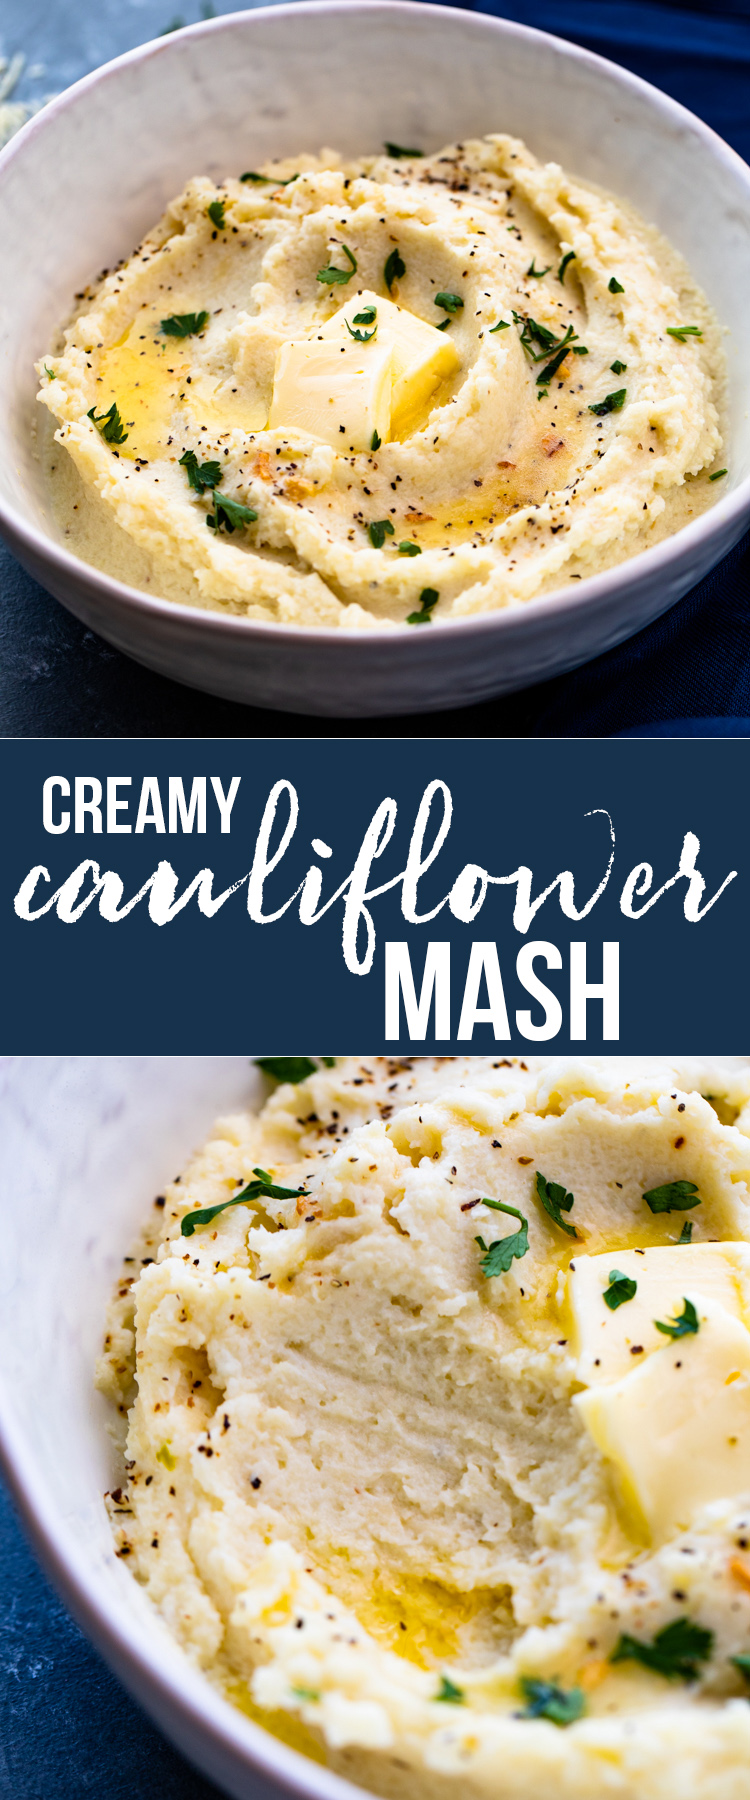 The Best Creamy Mashed Cauliflower (Low-carb/Keto)